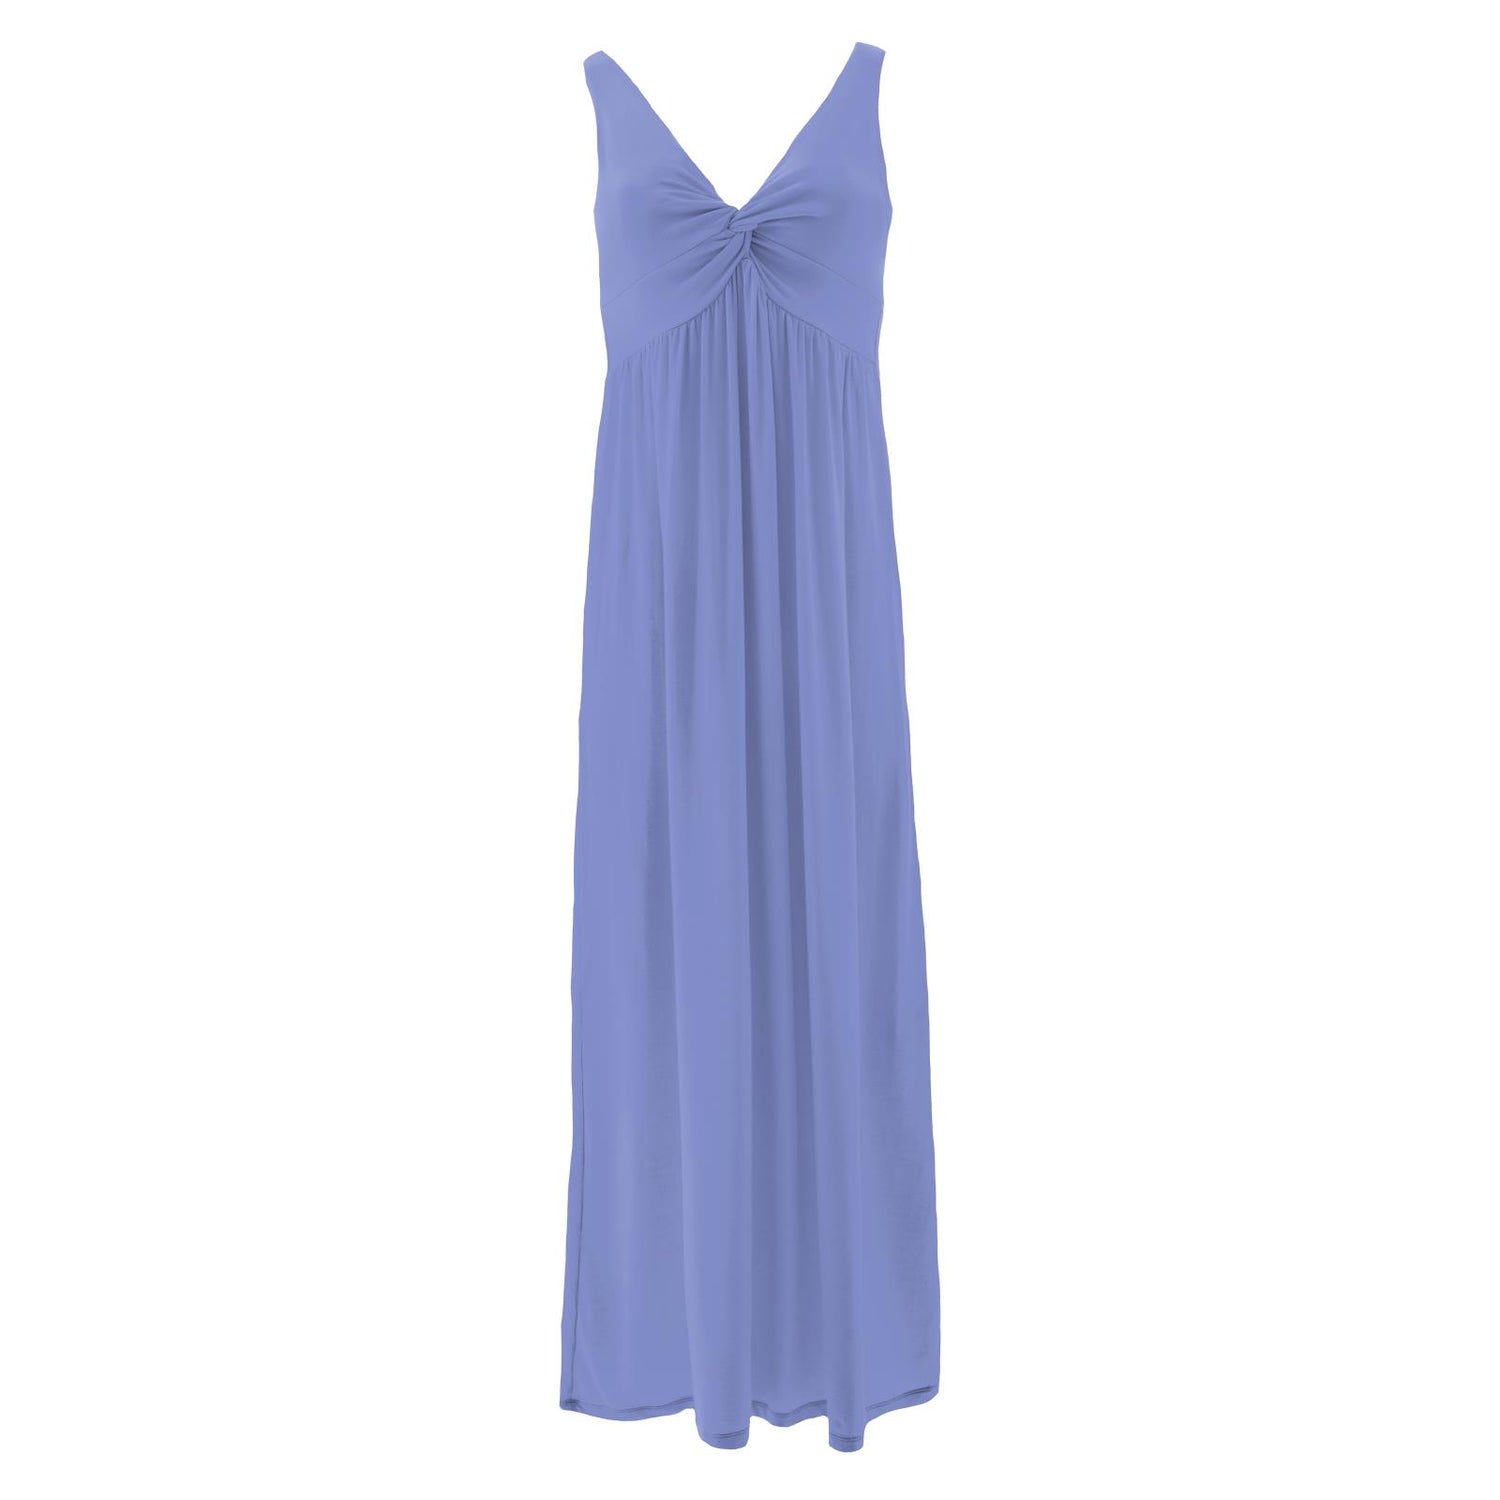 Women's Simple Twist Nightgown in Forget Me Not